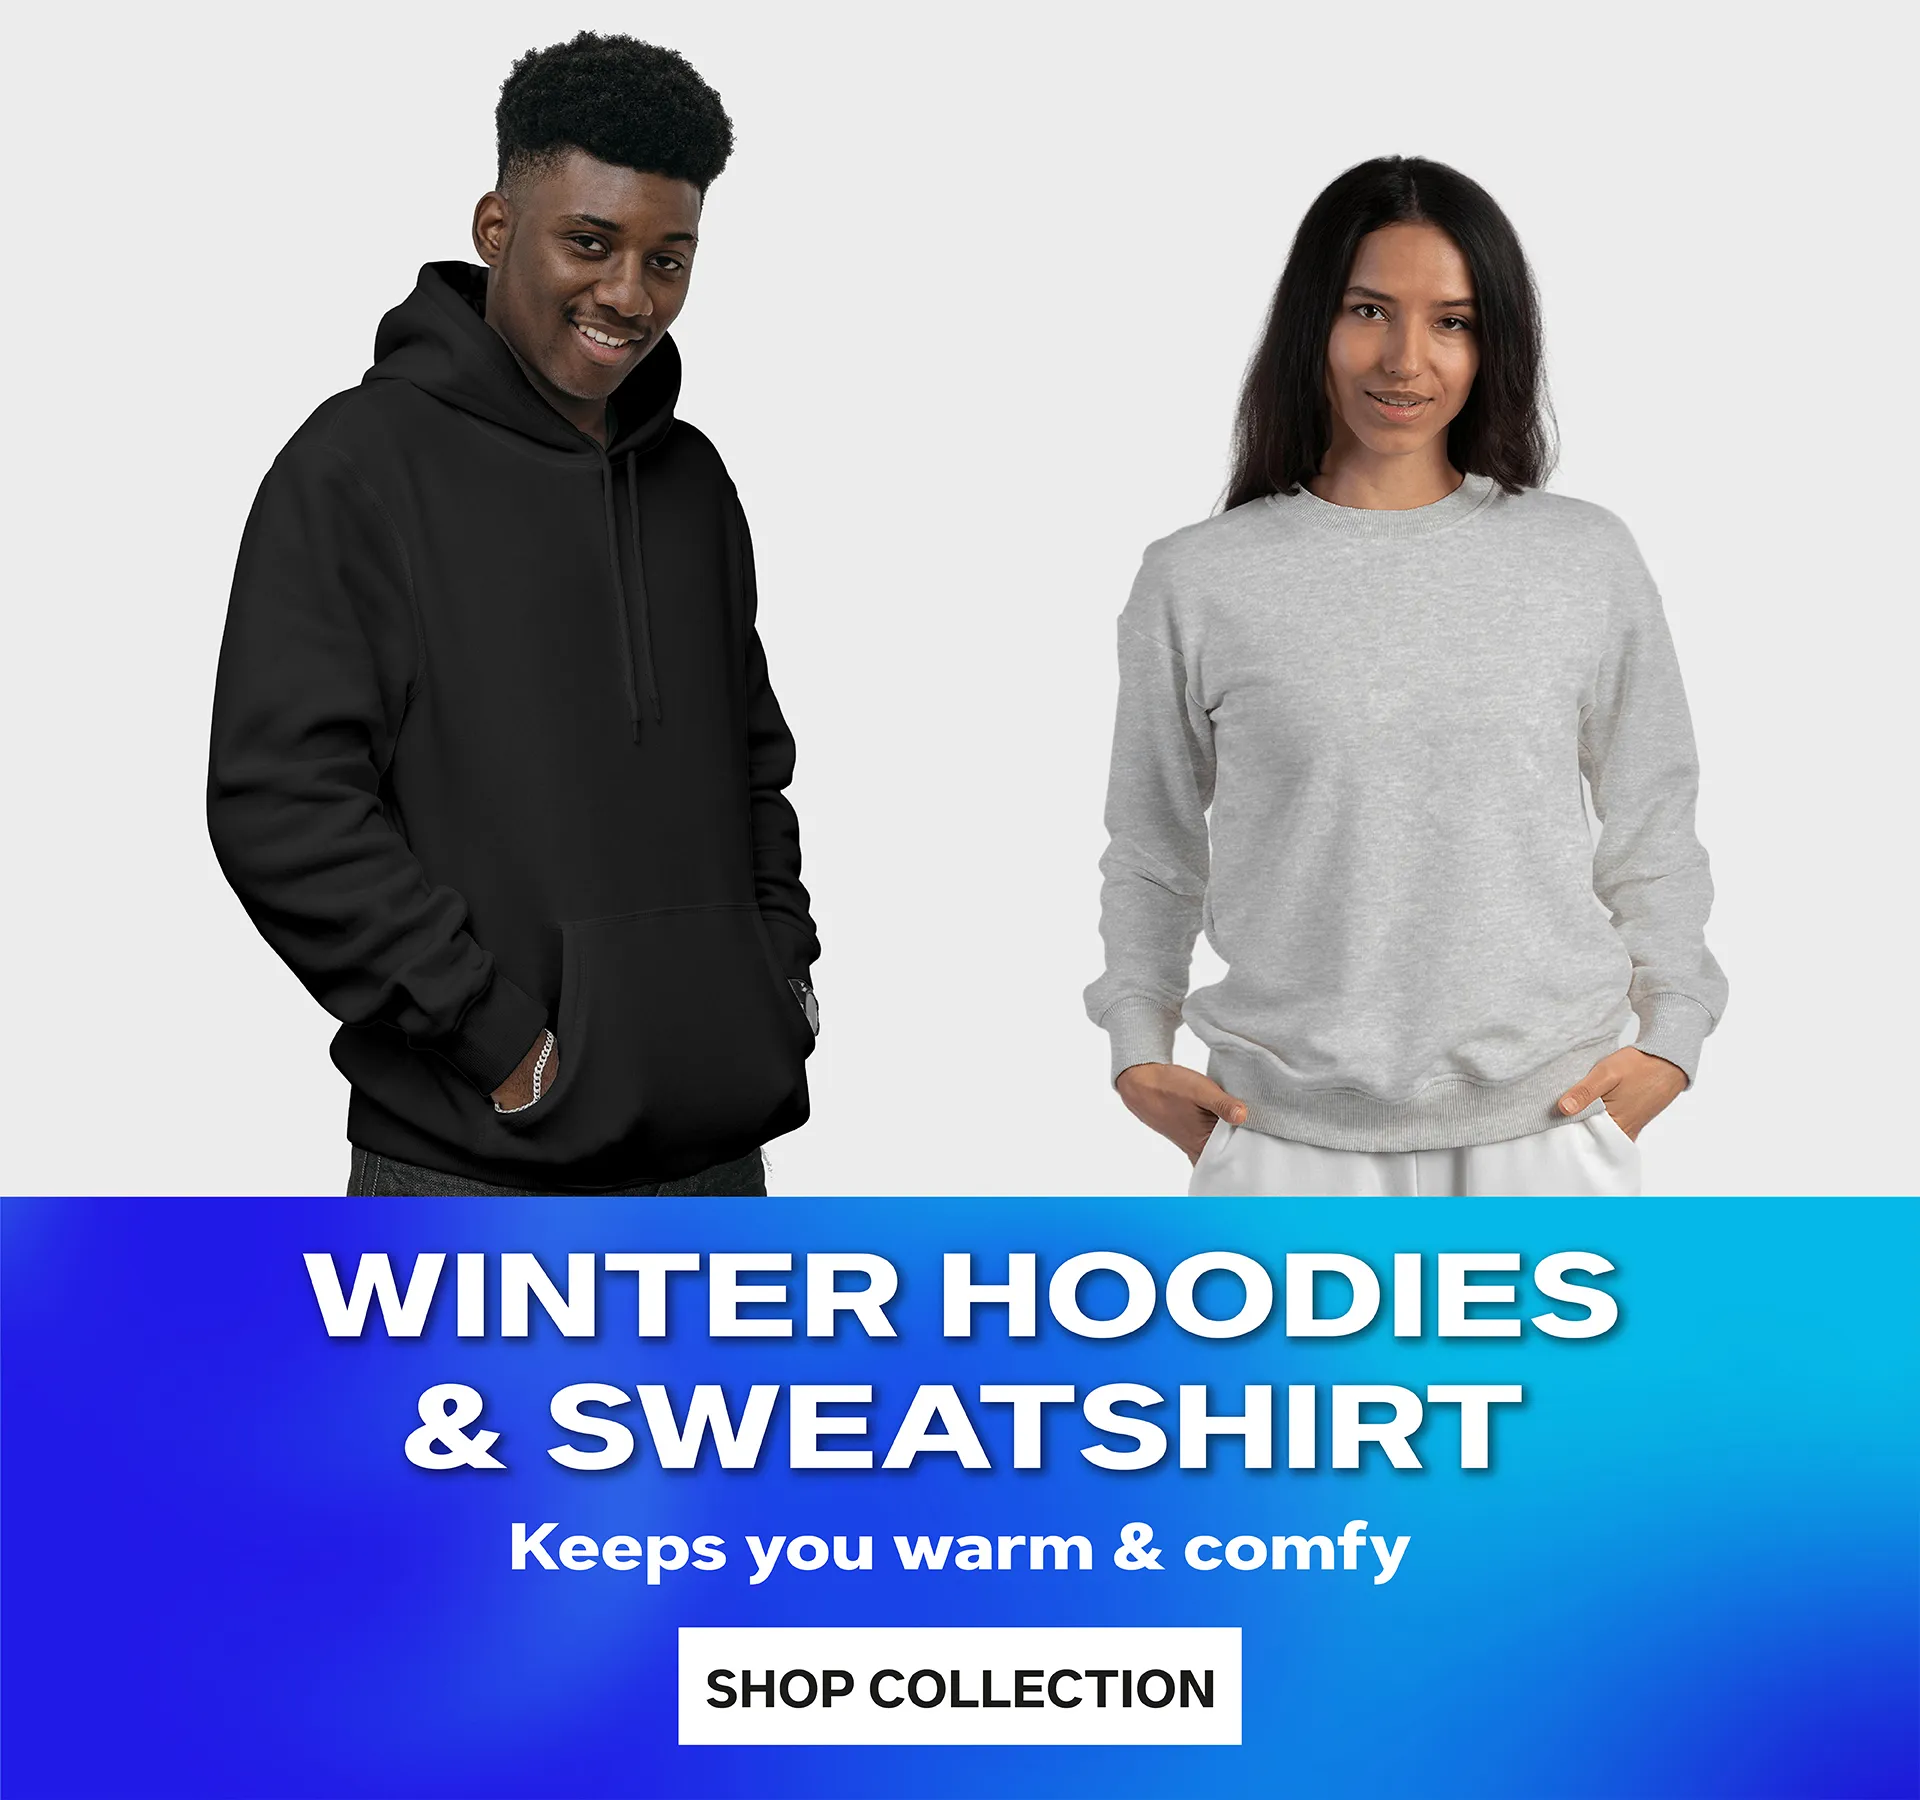 winter hoodies for men and sweatshirt for women in india winter wear jackets combo offer online at best price